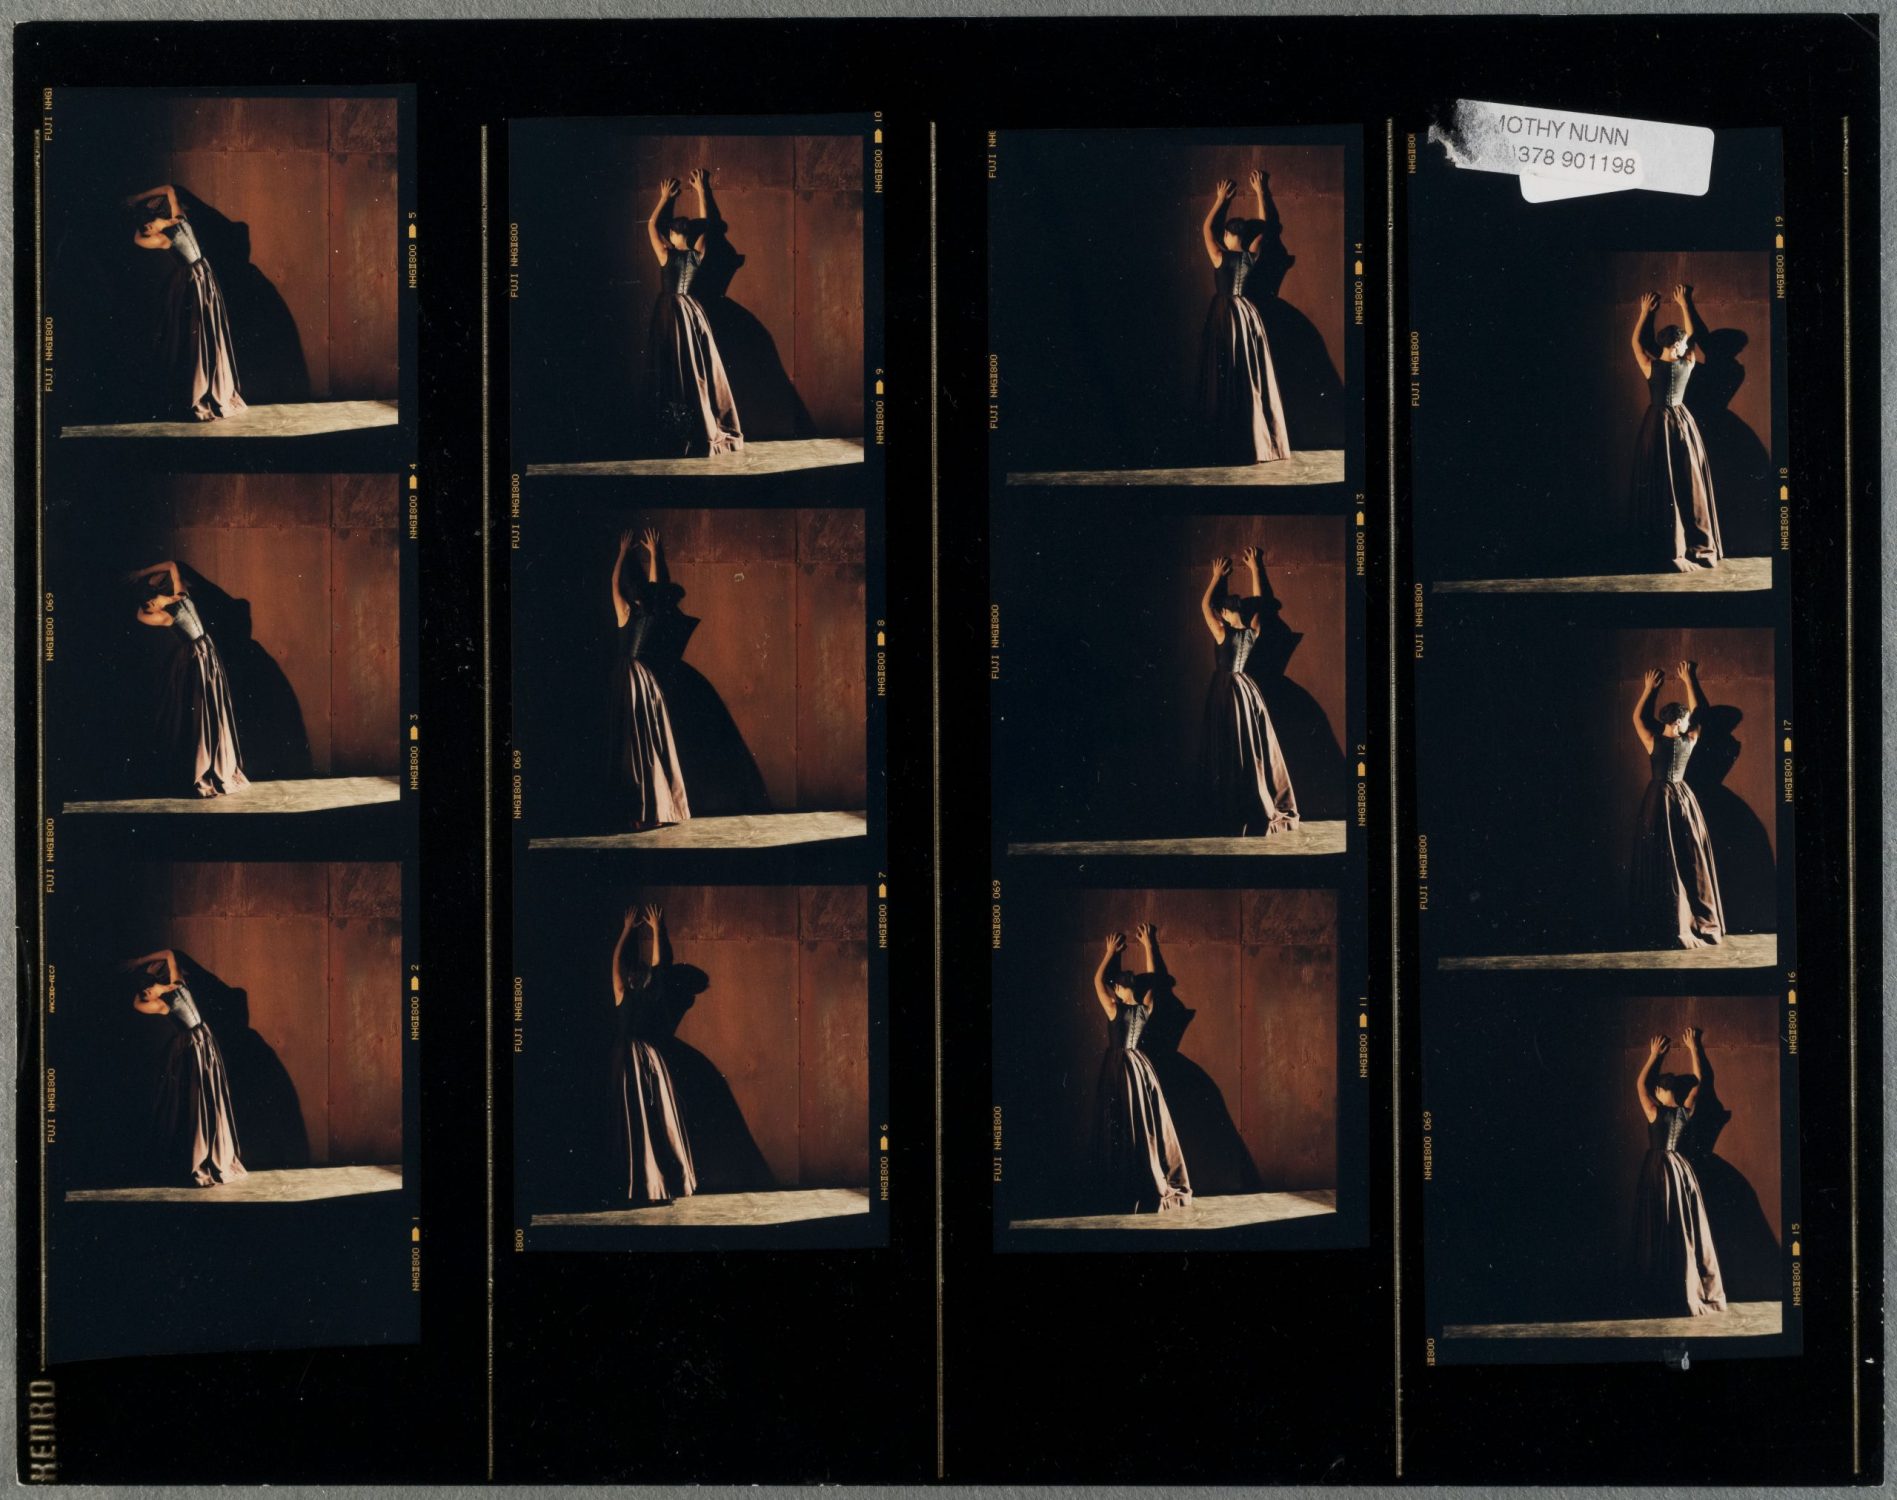 Contact sheet of a woman in a long grey dress with her arms against a wall.